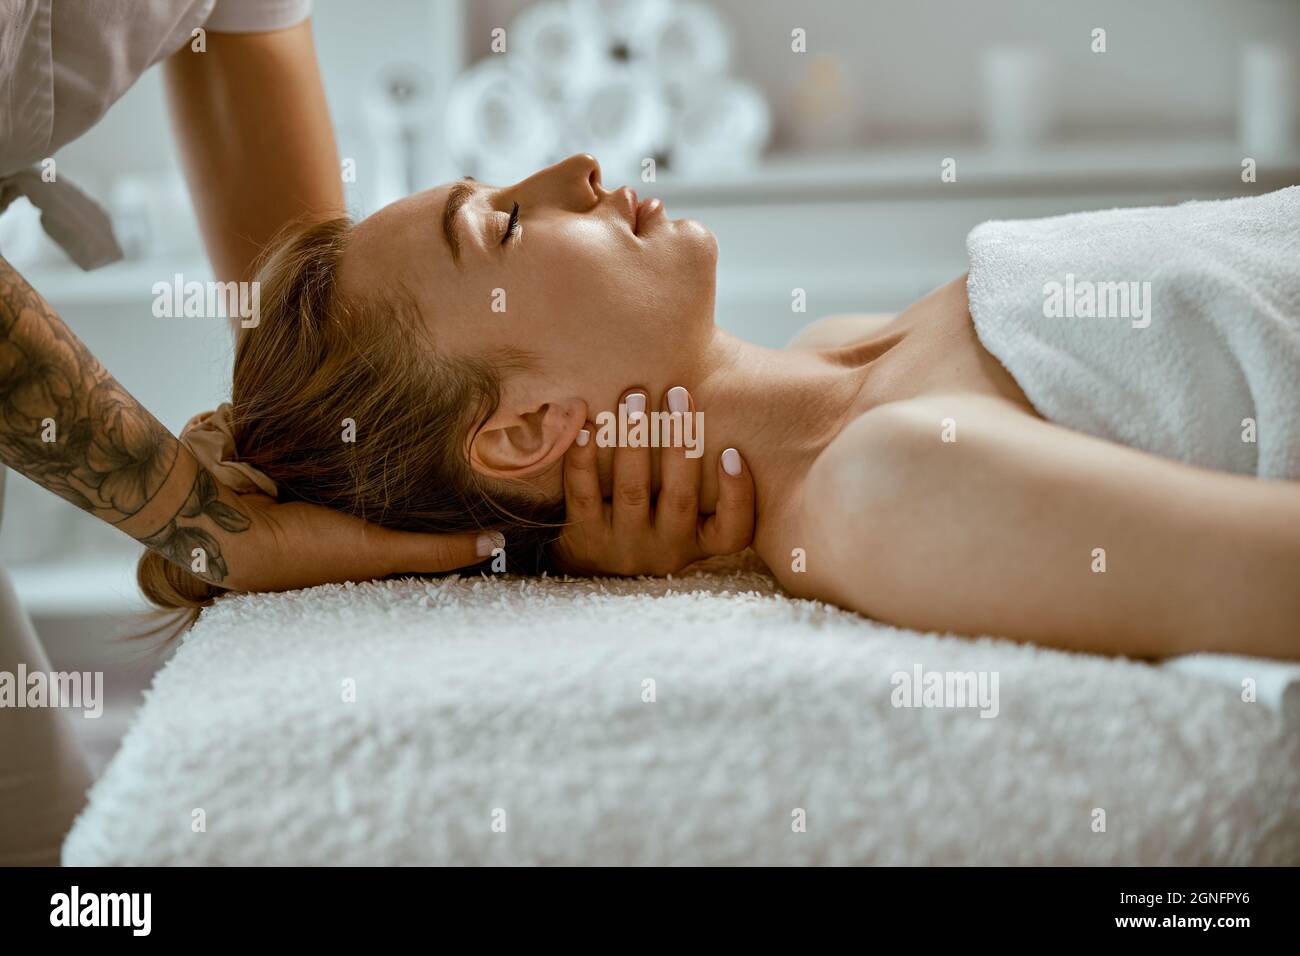 Shoulder and Neck Massage for Woman in Spa Salon. Stock Image